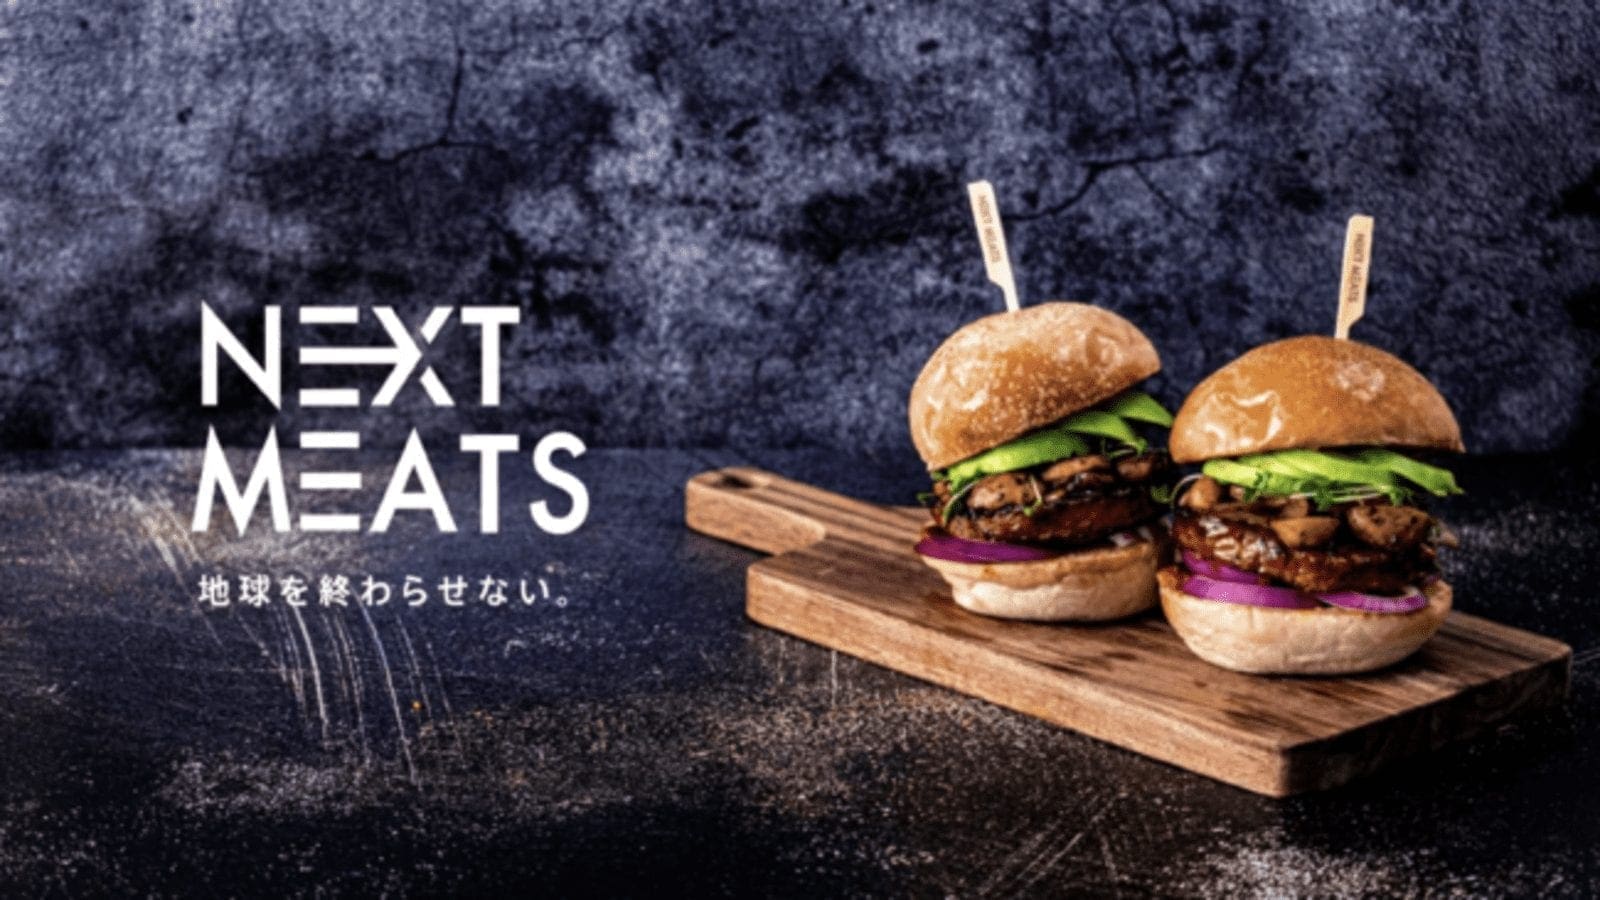 Next Meats launches accelerator program to initiate collaboration in the alternative protein industry